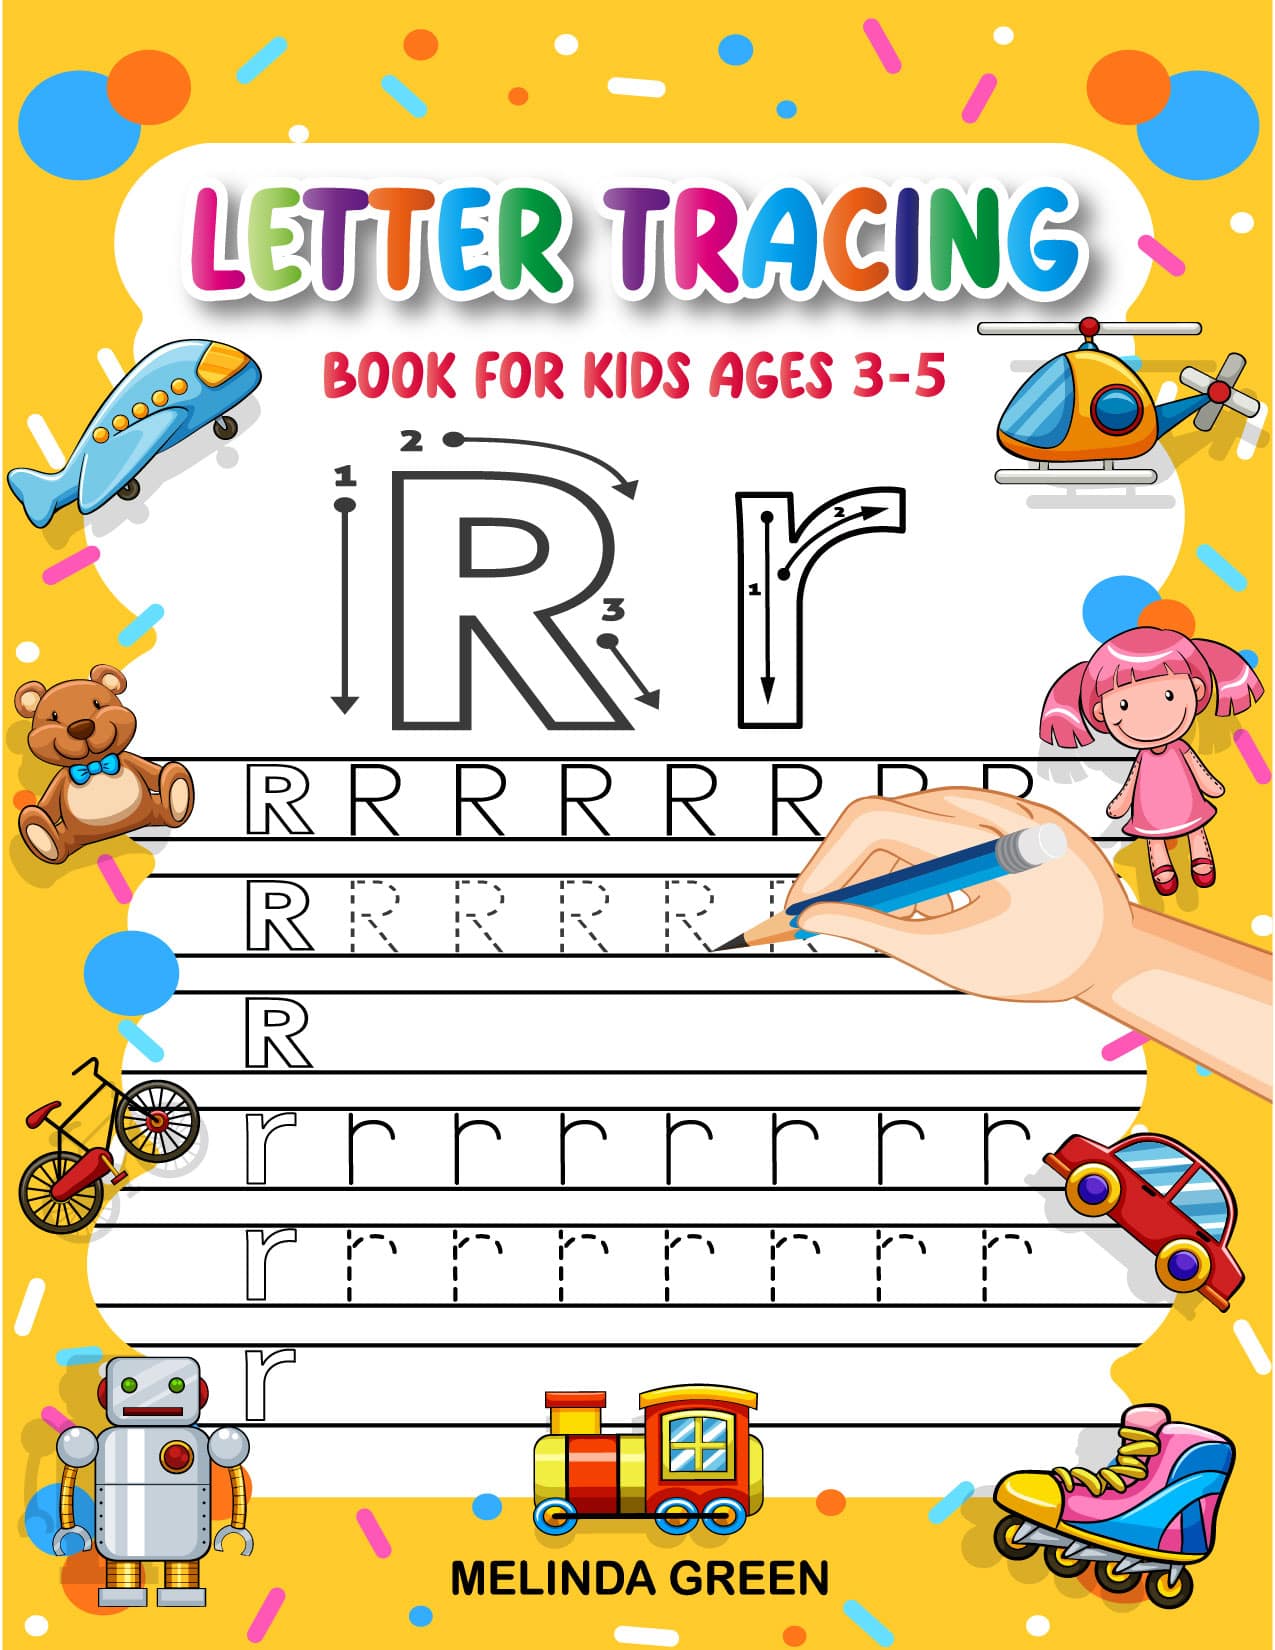 Letter Tracing Book For Kids: Alphabet Handwriting Practice Workbook for Kids 3-5,  Trace And Color Funny Animals,  Lined Paper Included For Practice